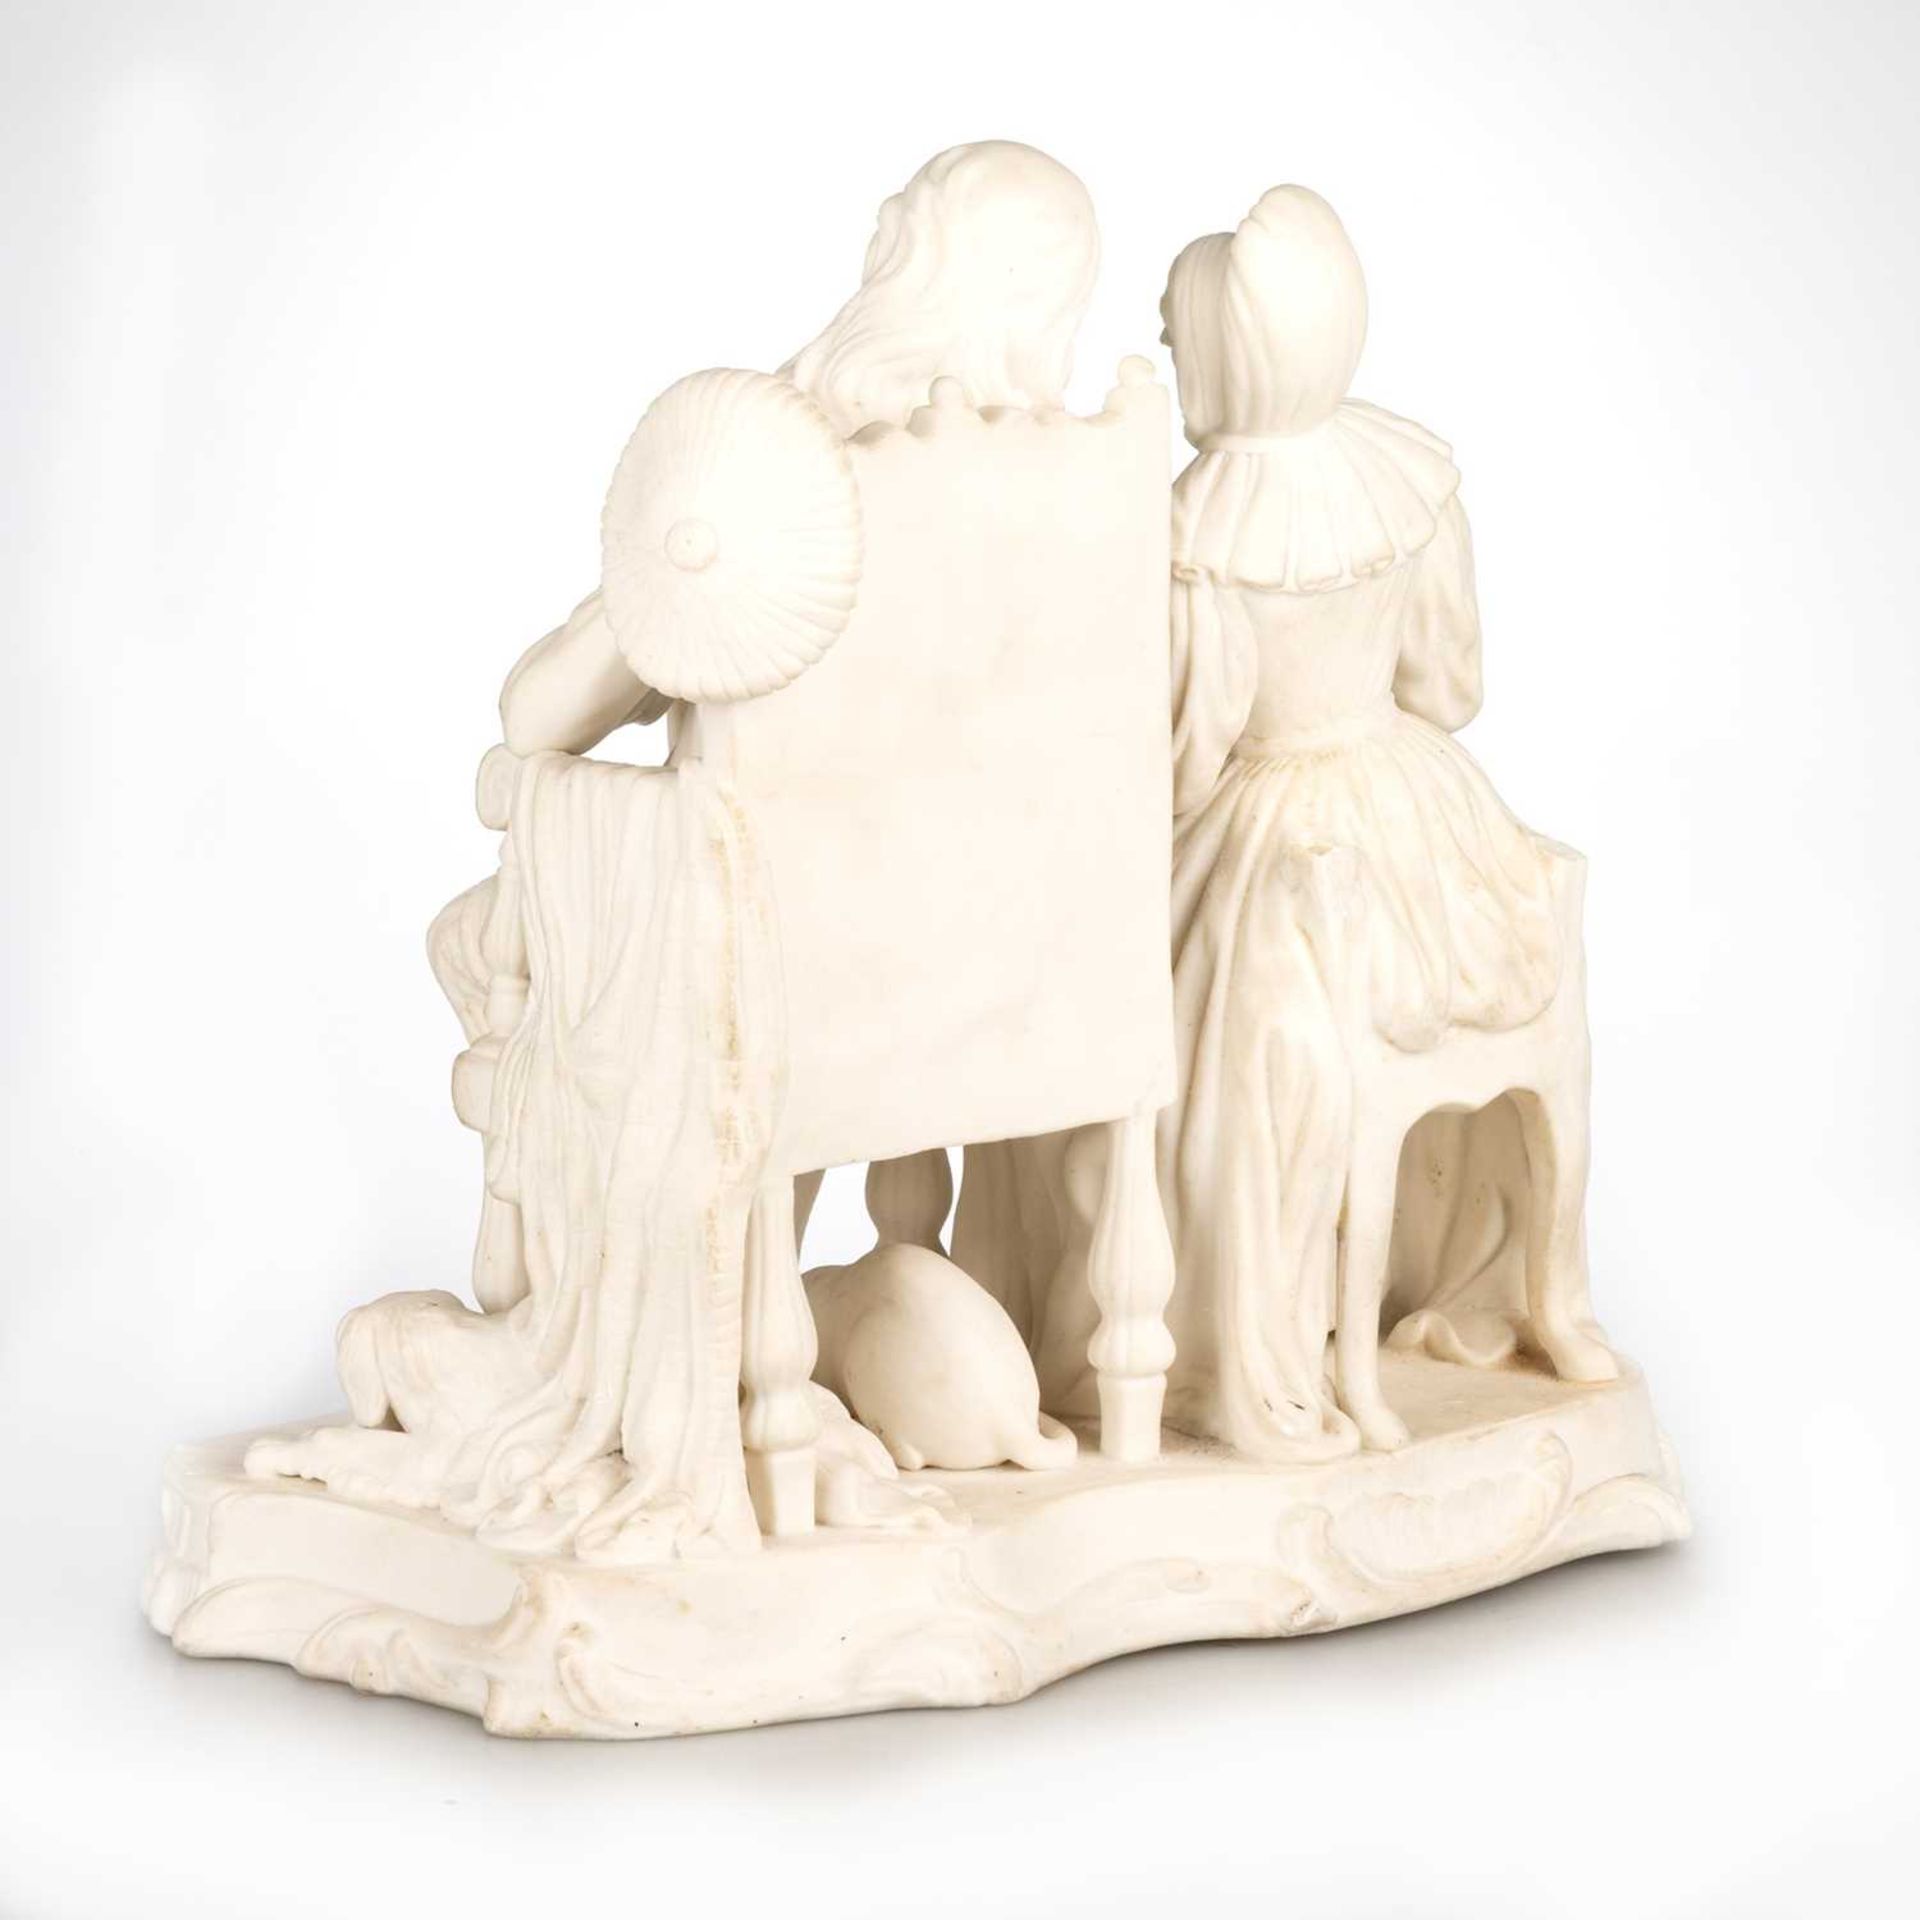 A MINTON BISCUIT PORCELAIN FIGURE GROUP, "JOHN ANDERSON MY JO", CIRCA 1830 - Image 2 of 2